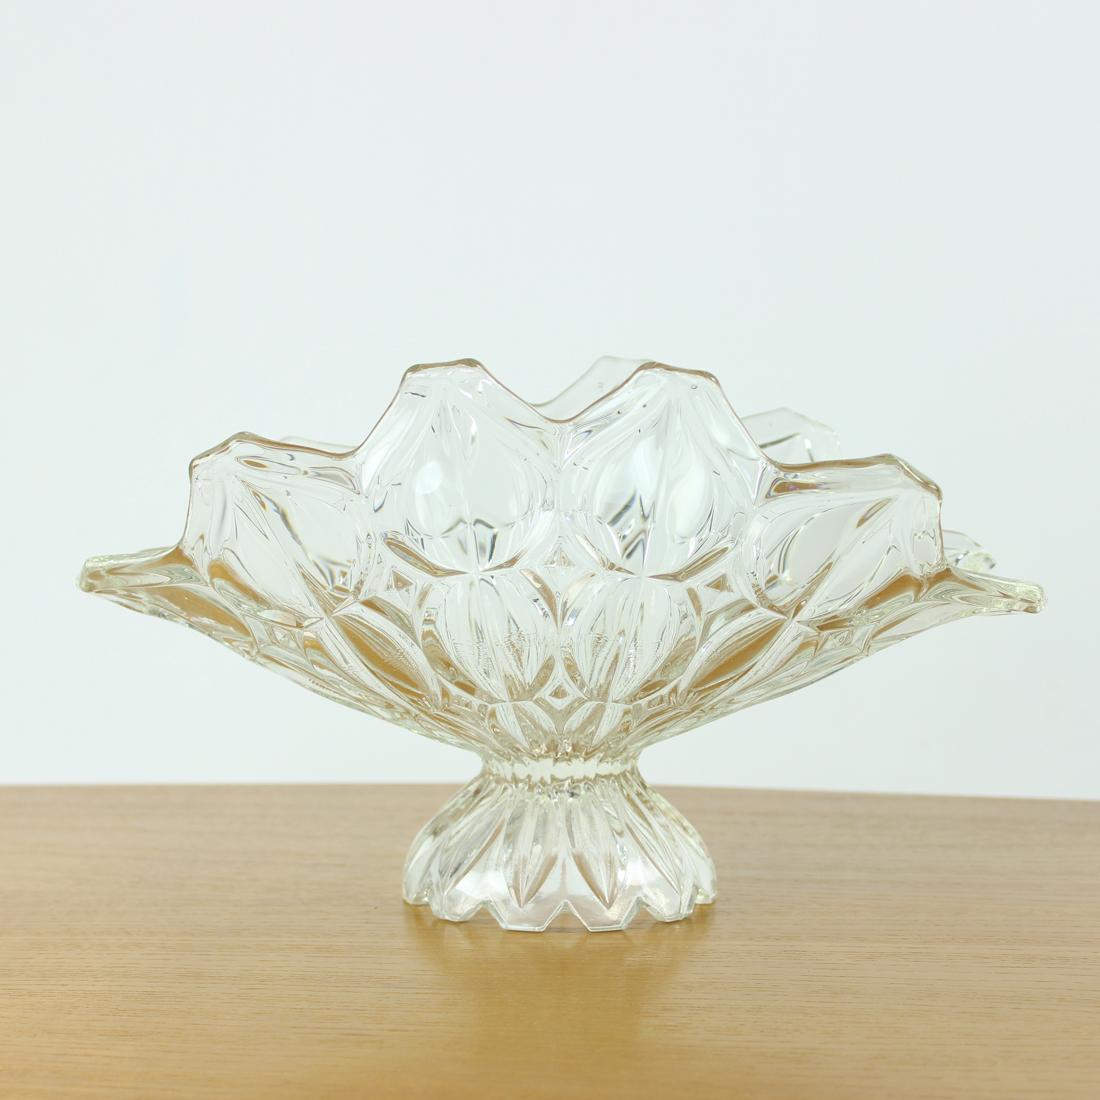 Art Glass Large Pressed Glass Bowl, Tulip Collection Hermanowa Hut, 1957 For Sale